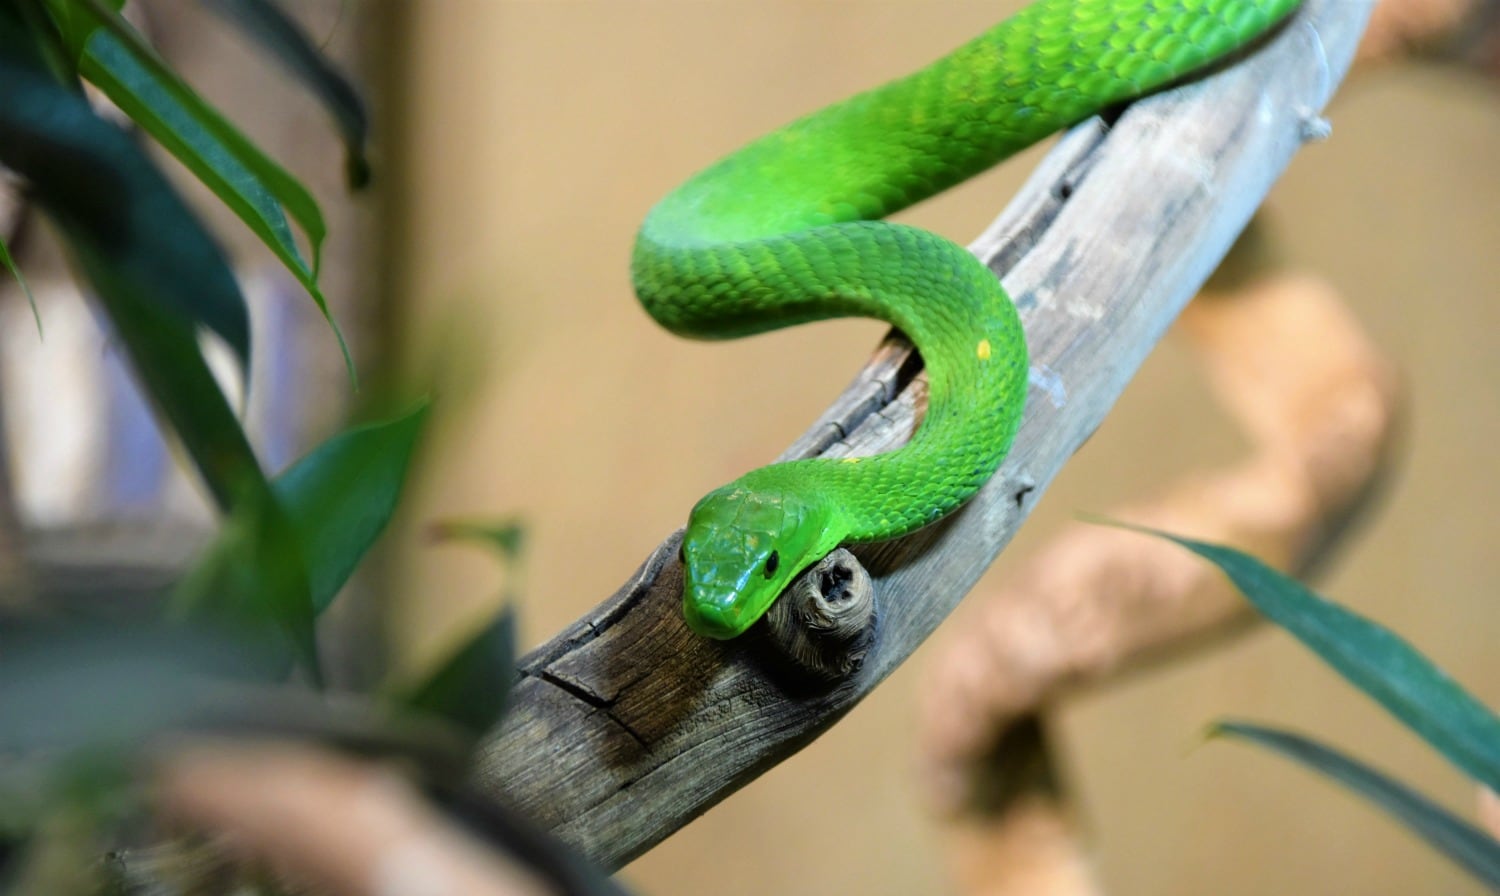 Benefits Of Keeping Snakes As Pets